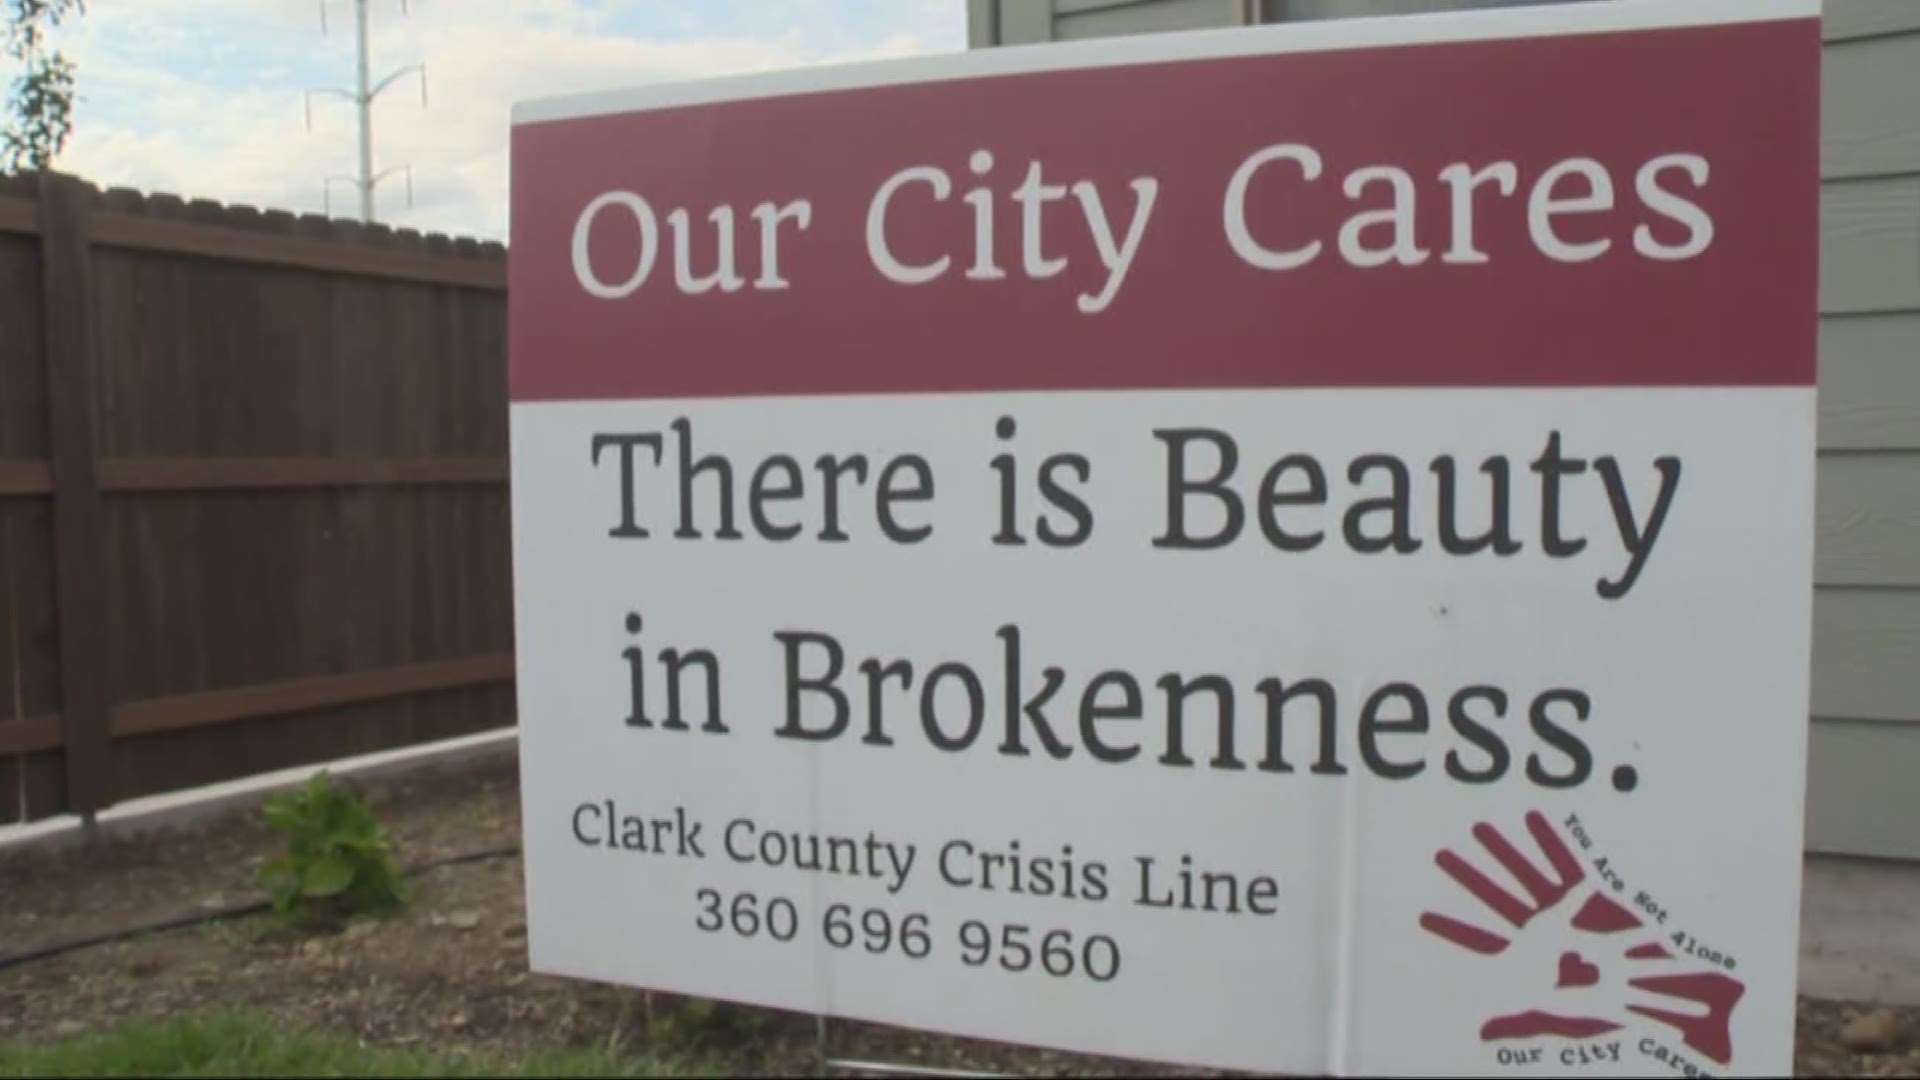 Organization posts signs they hope will bring hope to those dealing with suicide.